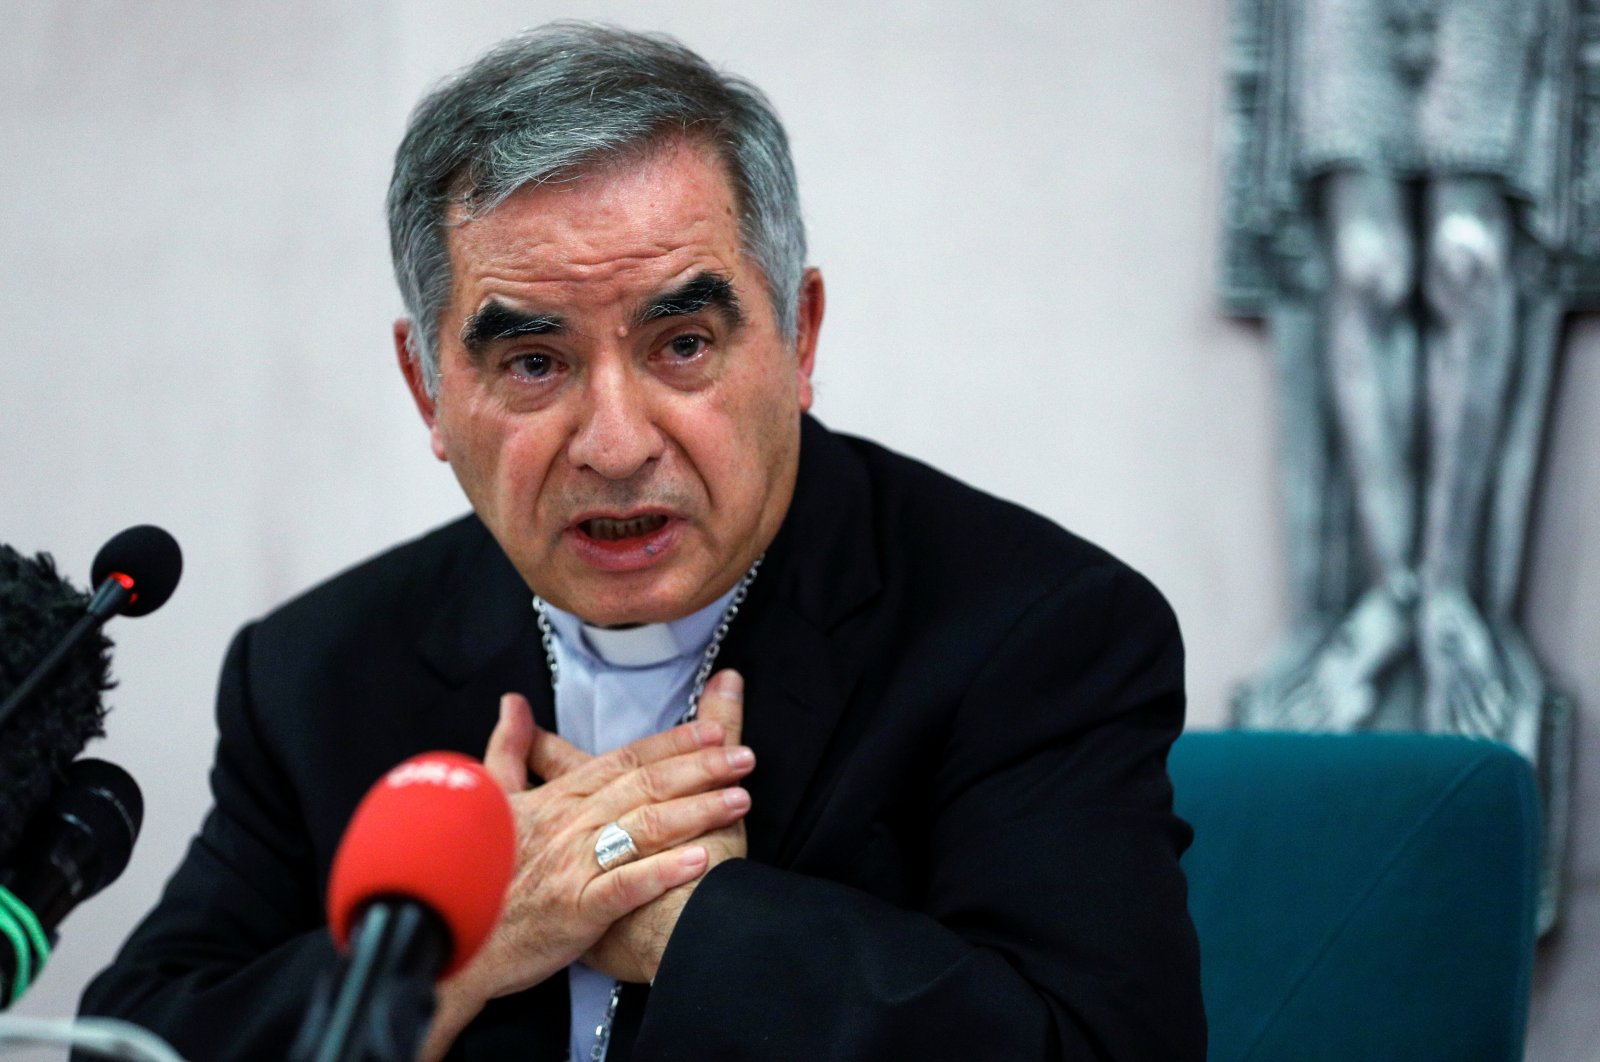 Cardinal Giovanni Angelo Becciu, who has been caught up in a real estate scandal, speaks to the media a day after he resigned suddenly and gave up his right to take part in an eventual conclave to elect a pope, near the Vatican, in Rome, Italy, September 25, 2020. (Reuters Photo)